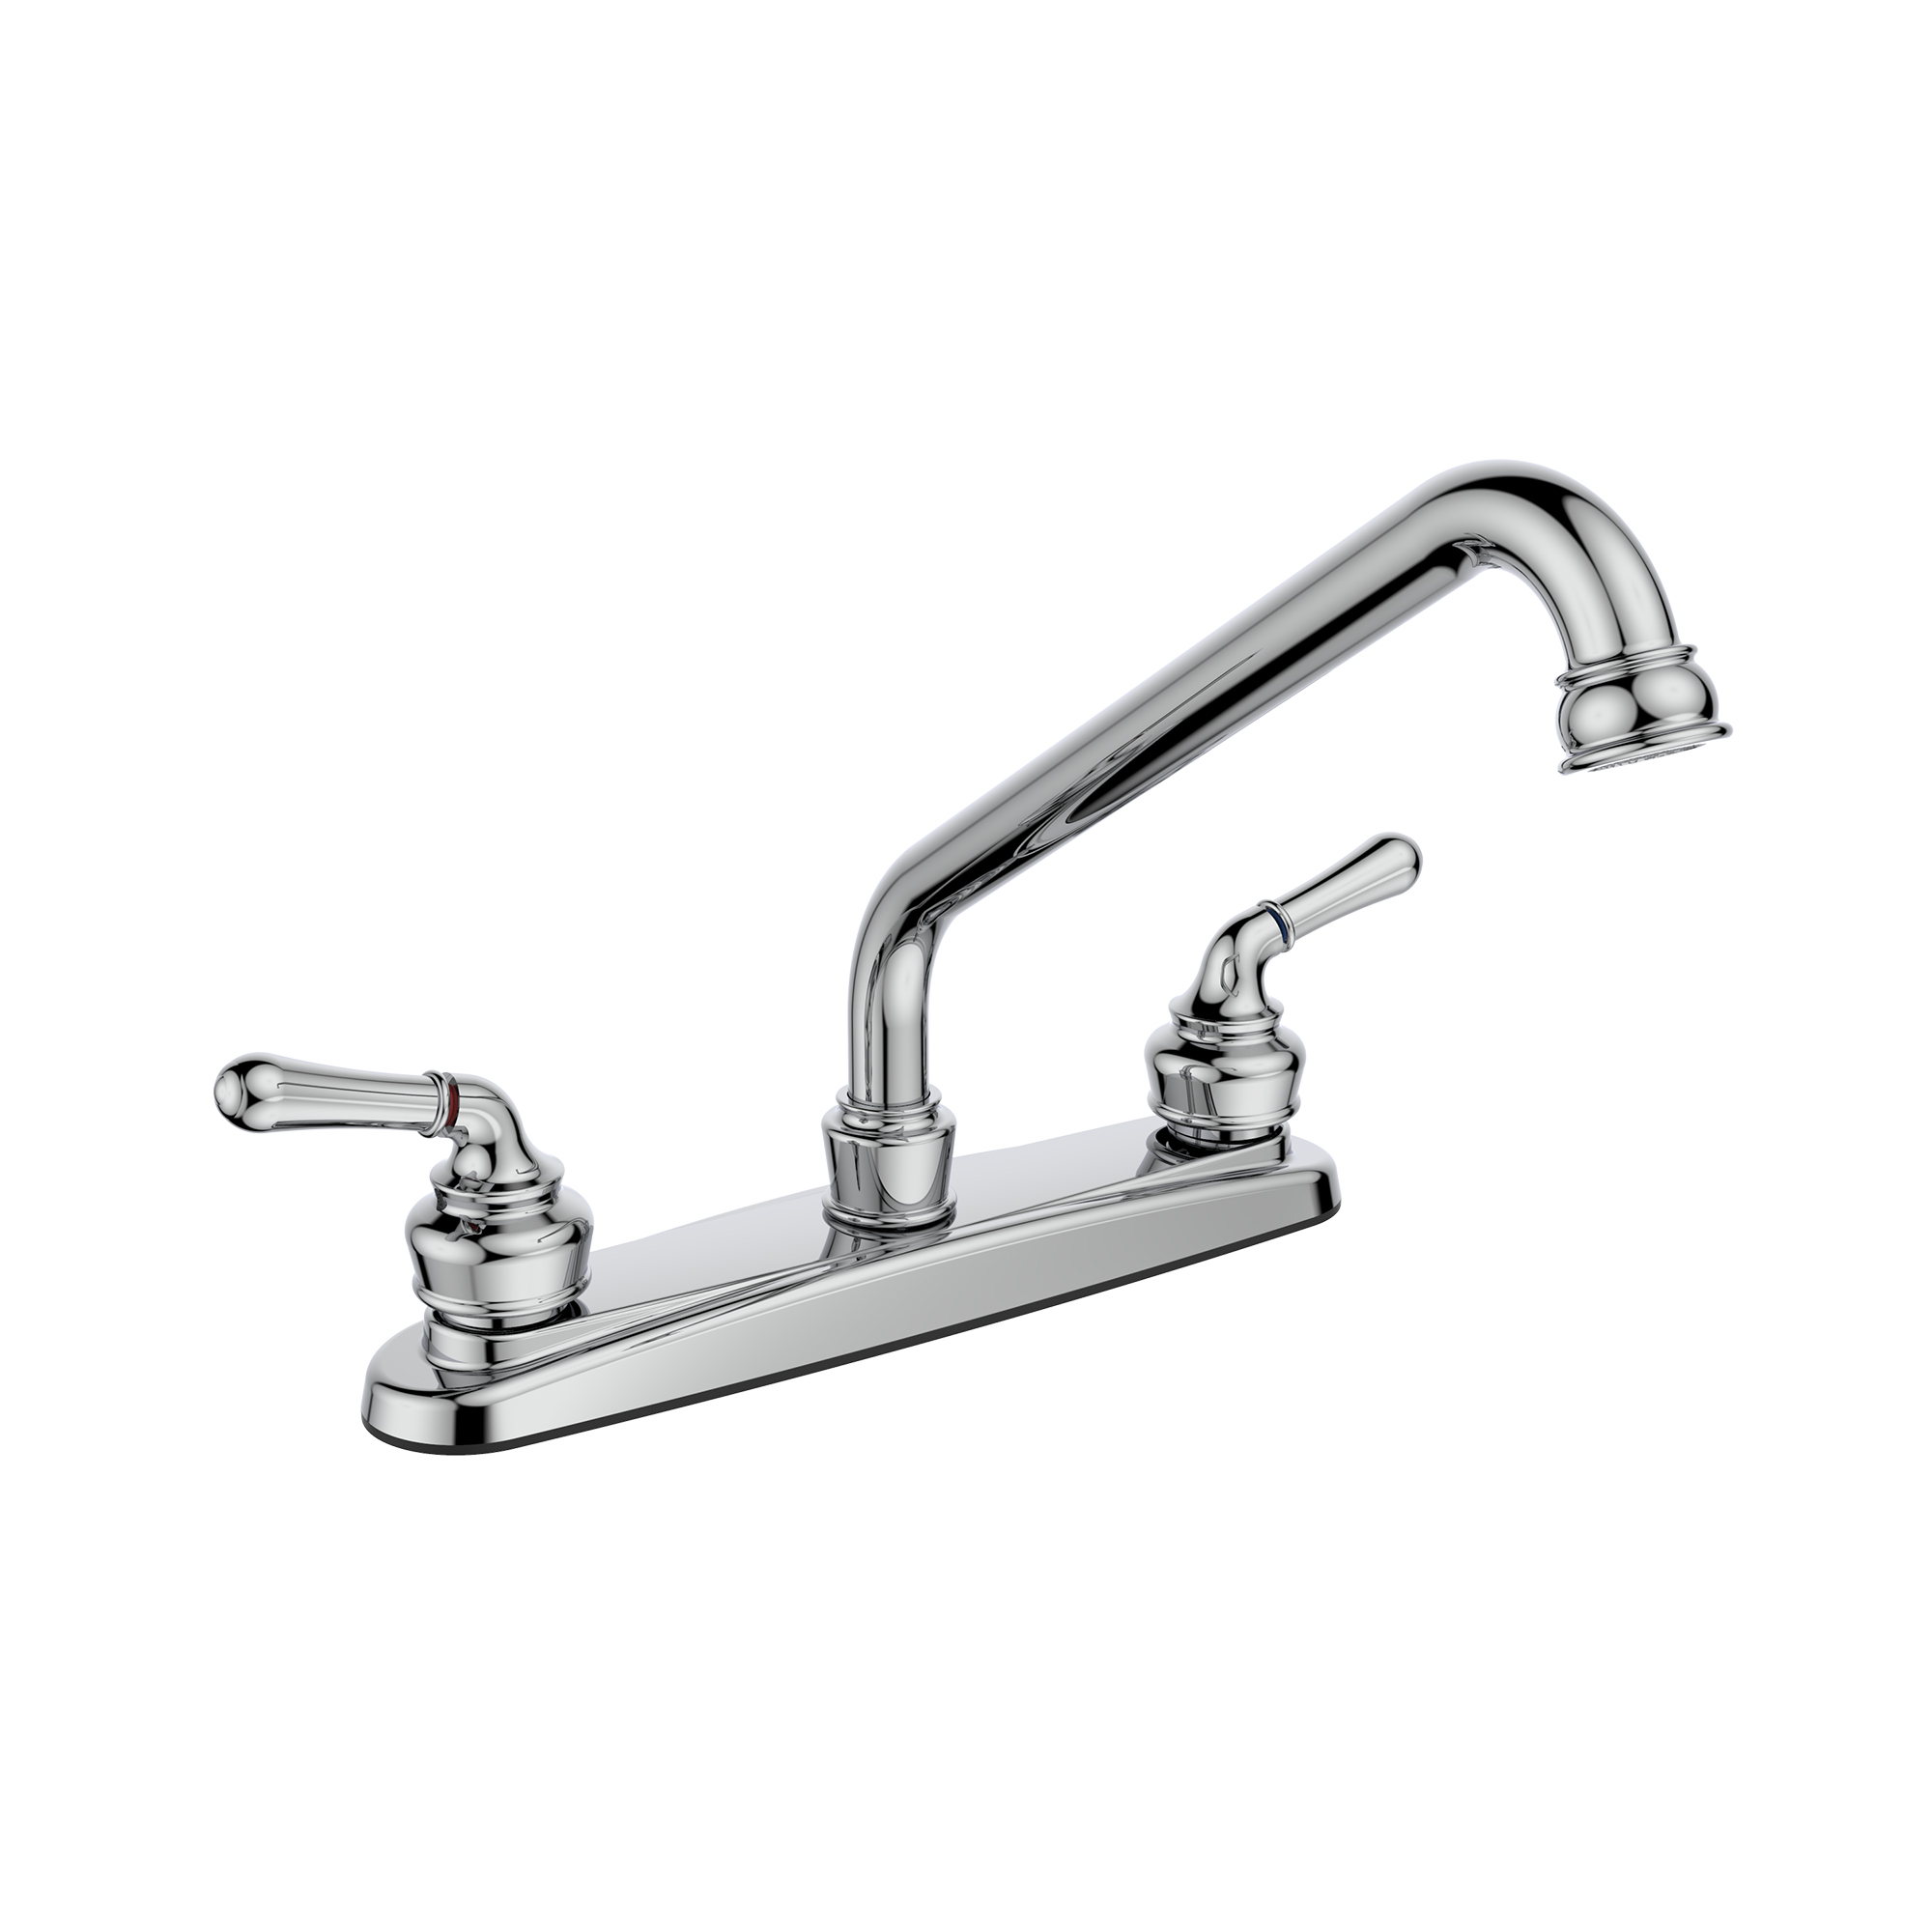 2.5 X 12 X 15.5 In. Kitchen Sink Faucet With Low Arc Spout & 2 Handles, Polished Chrome